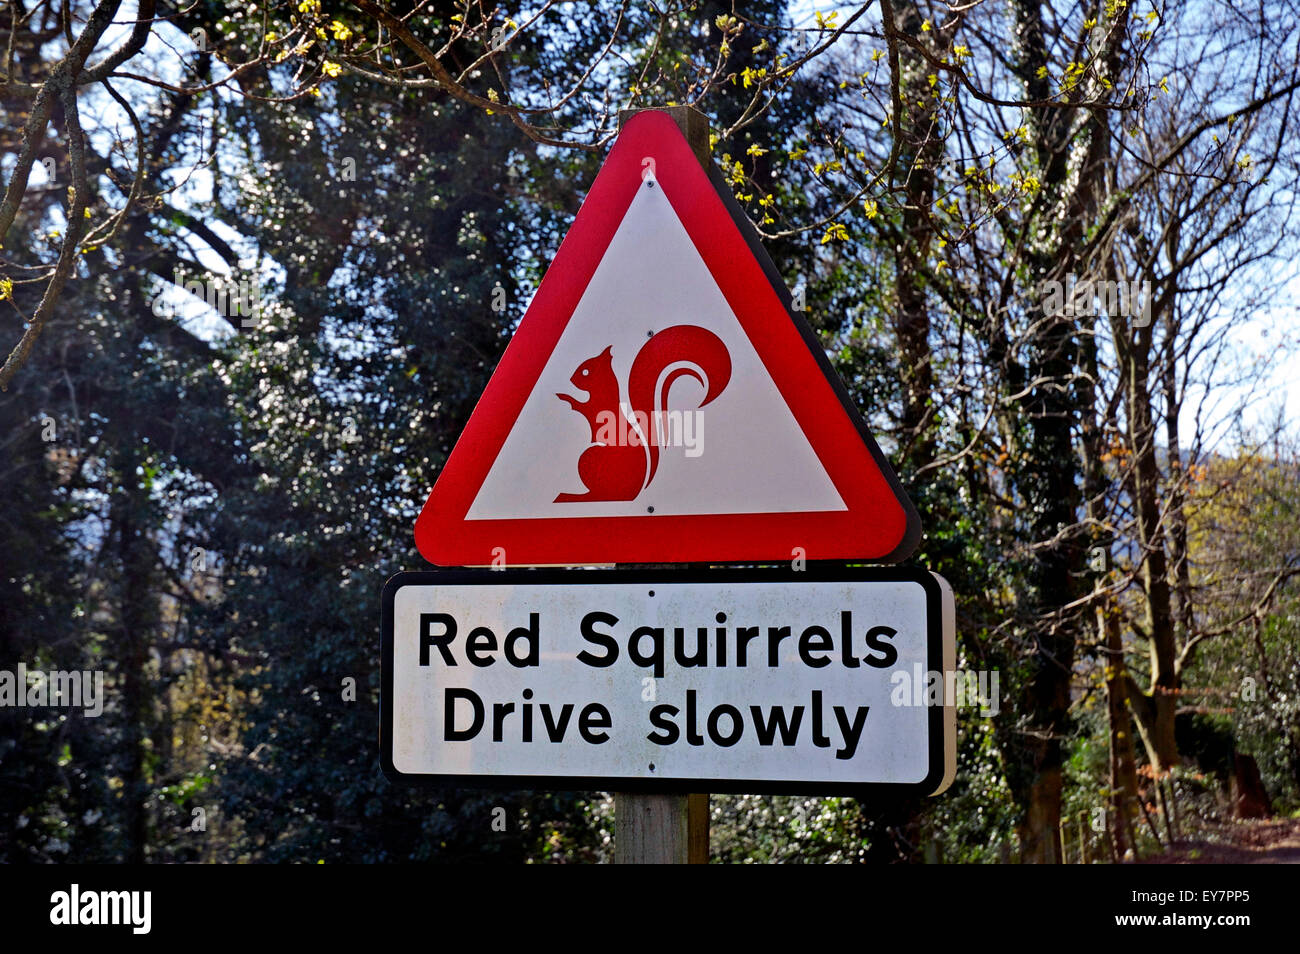 red-squirrels-drive-slowly-wildlife-warning-road-sign-in-cumbria-uk-EY7PP5.jpg